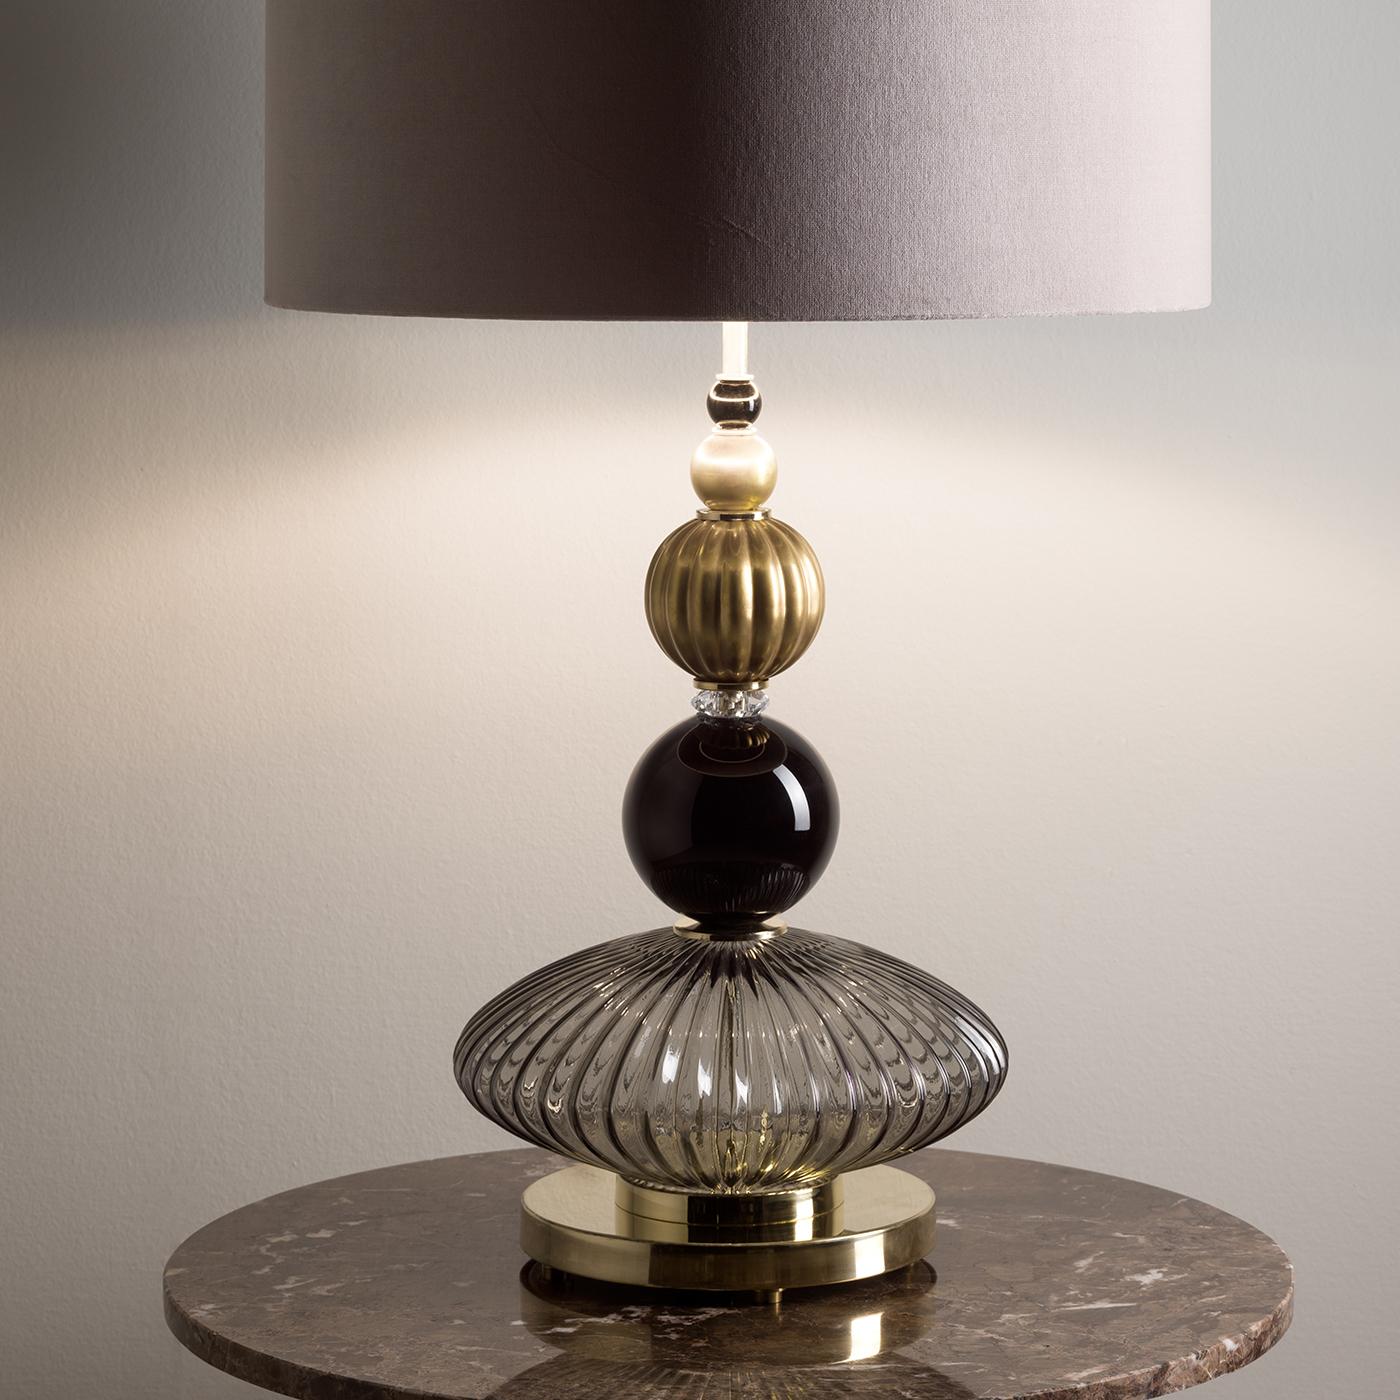 A series of glass elements of different shapes stacked one on the other forms the eye-catching stem of this exquisite table lamp. Each element boasts a different color and texture to add a refined sense of movement to this piece, topped with a